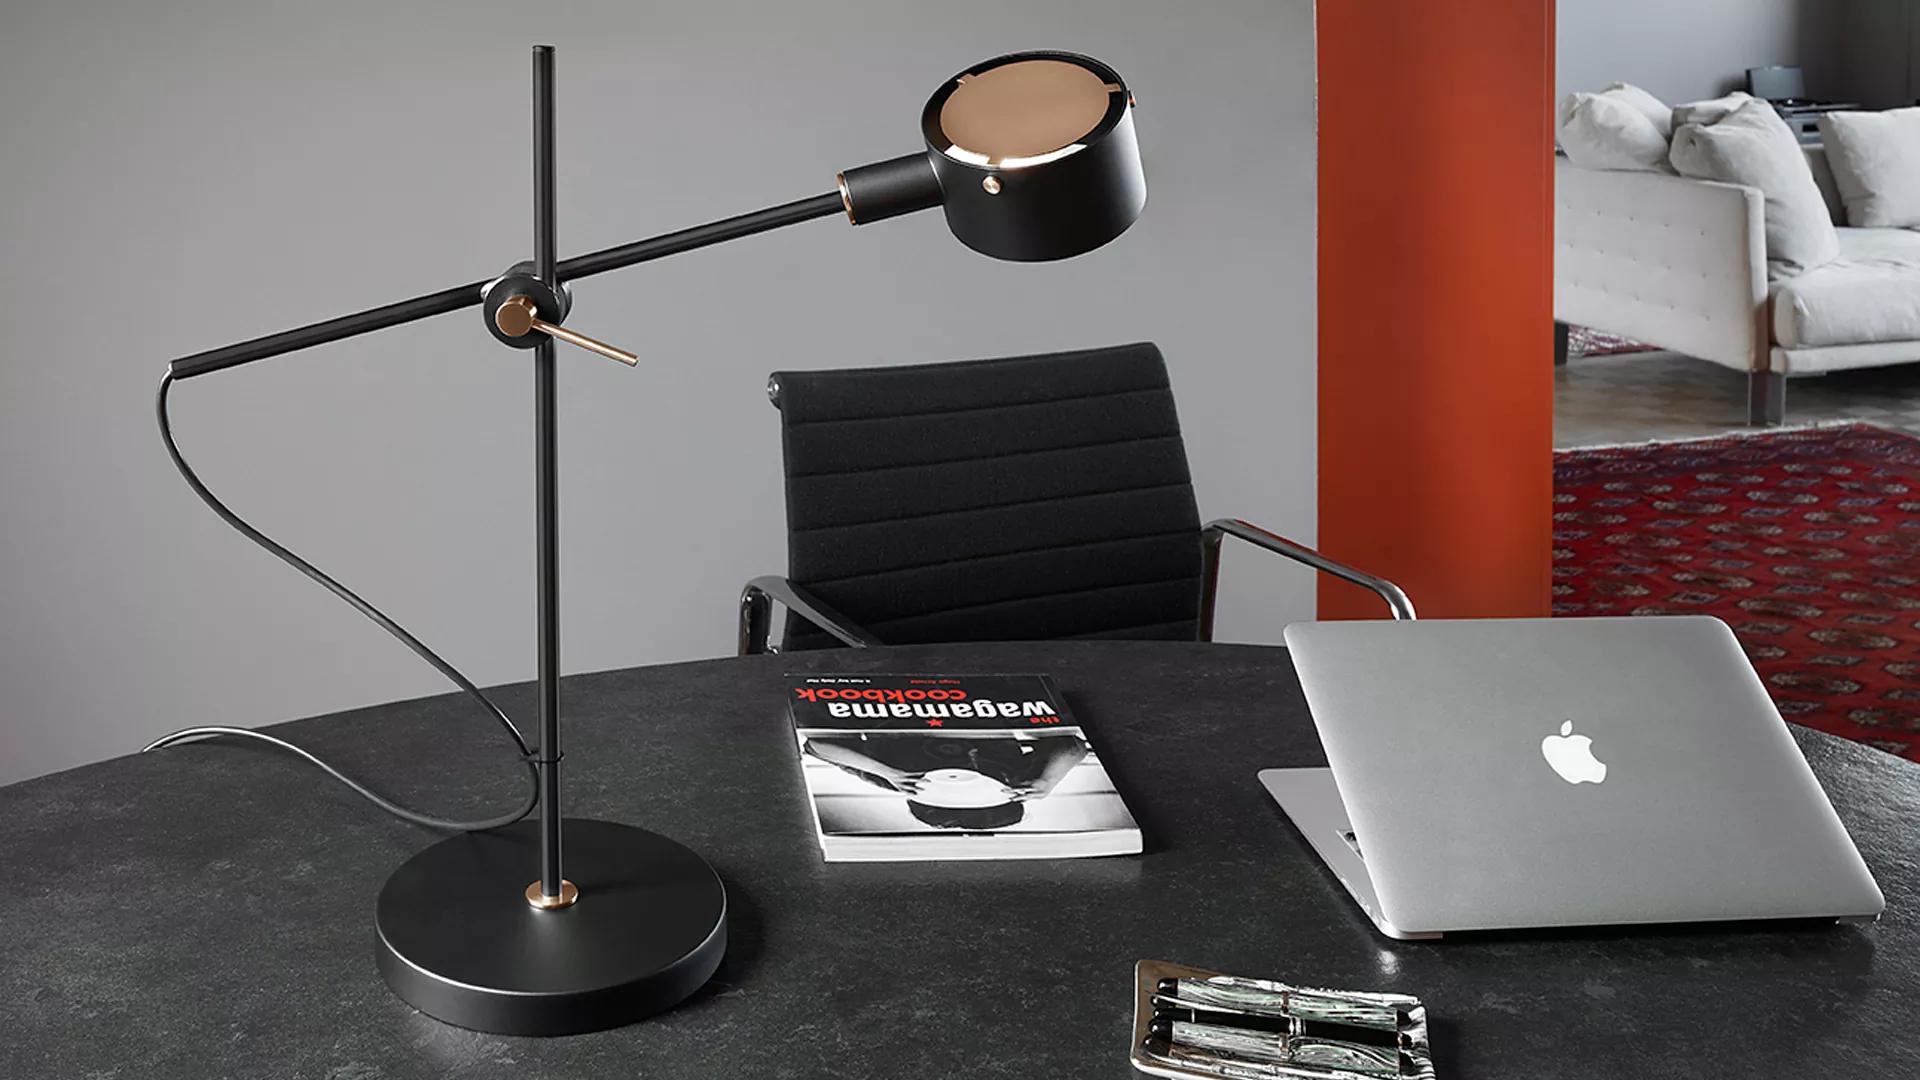 Giuseppe Ostuni Model 252 'G.O.' table lamp in black for Oluce. 

Originally designed by Giuseppe Ostuni in the 1960s, this iconic re-edition is still crafted by Oluce in Italy using many of the original manufacturing techniques with scrupulous